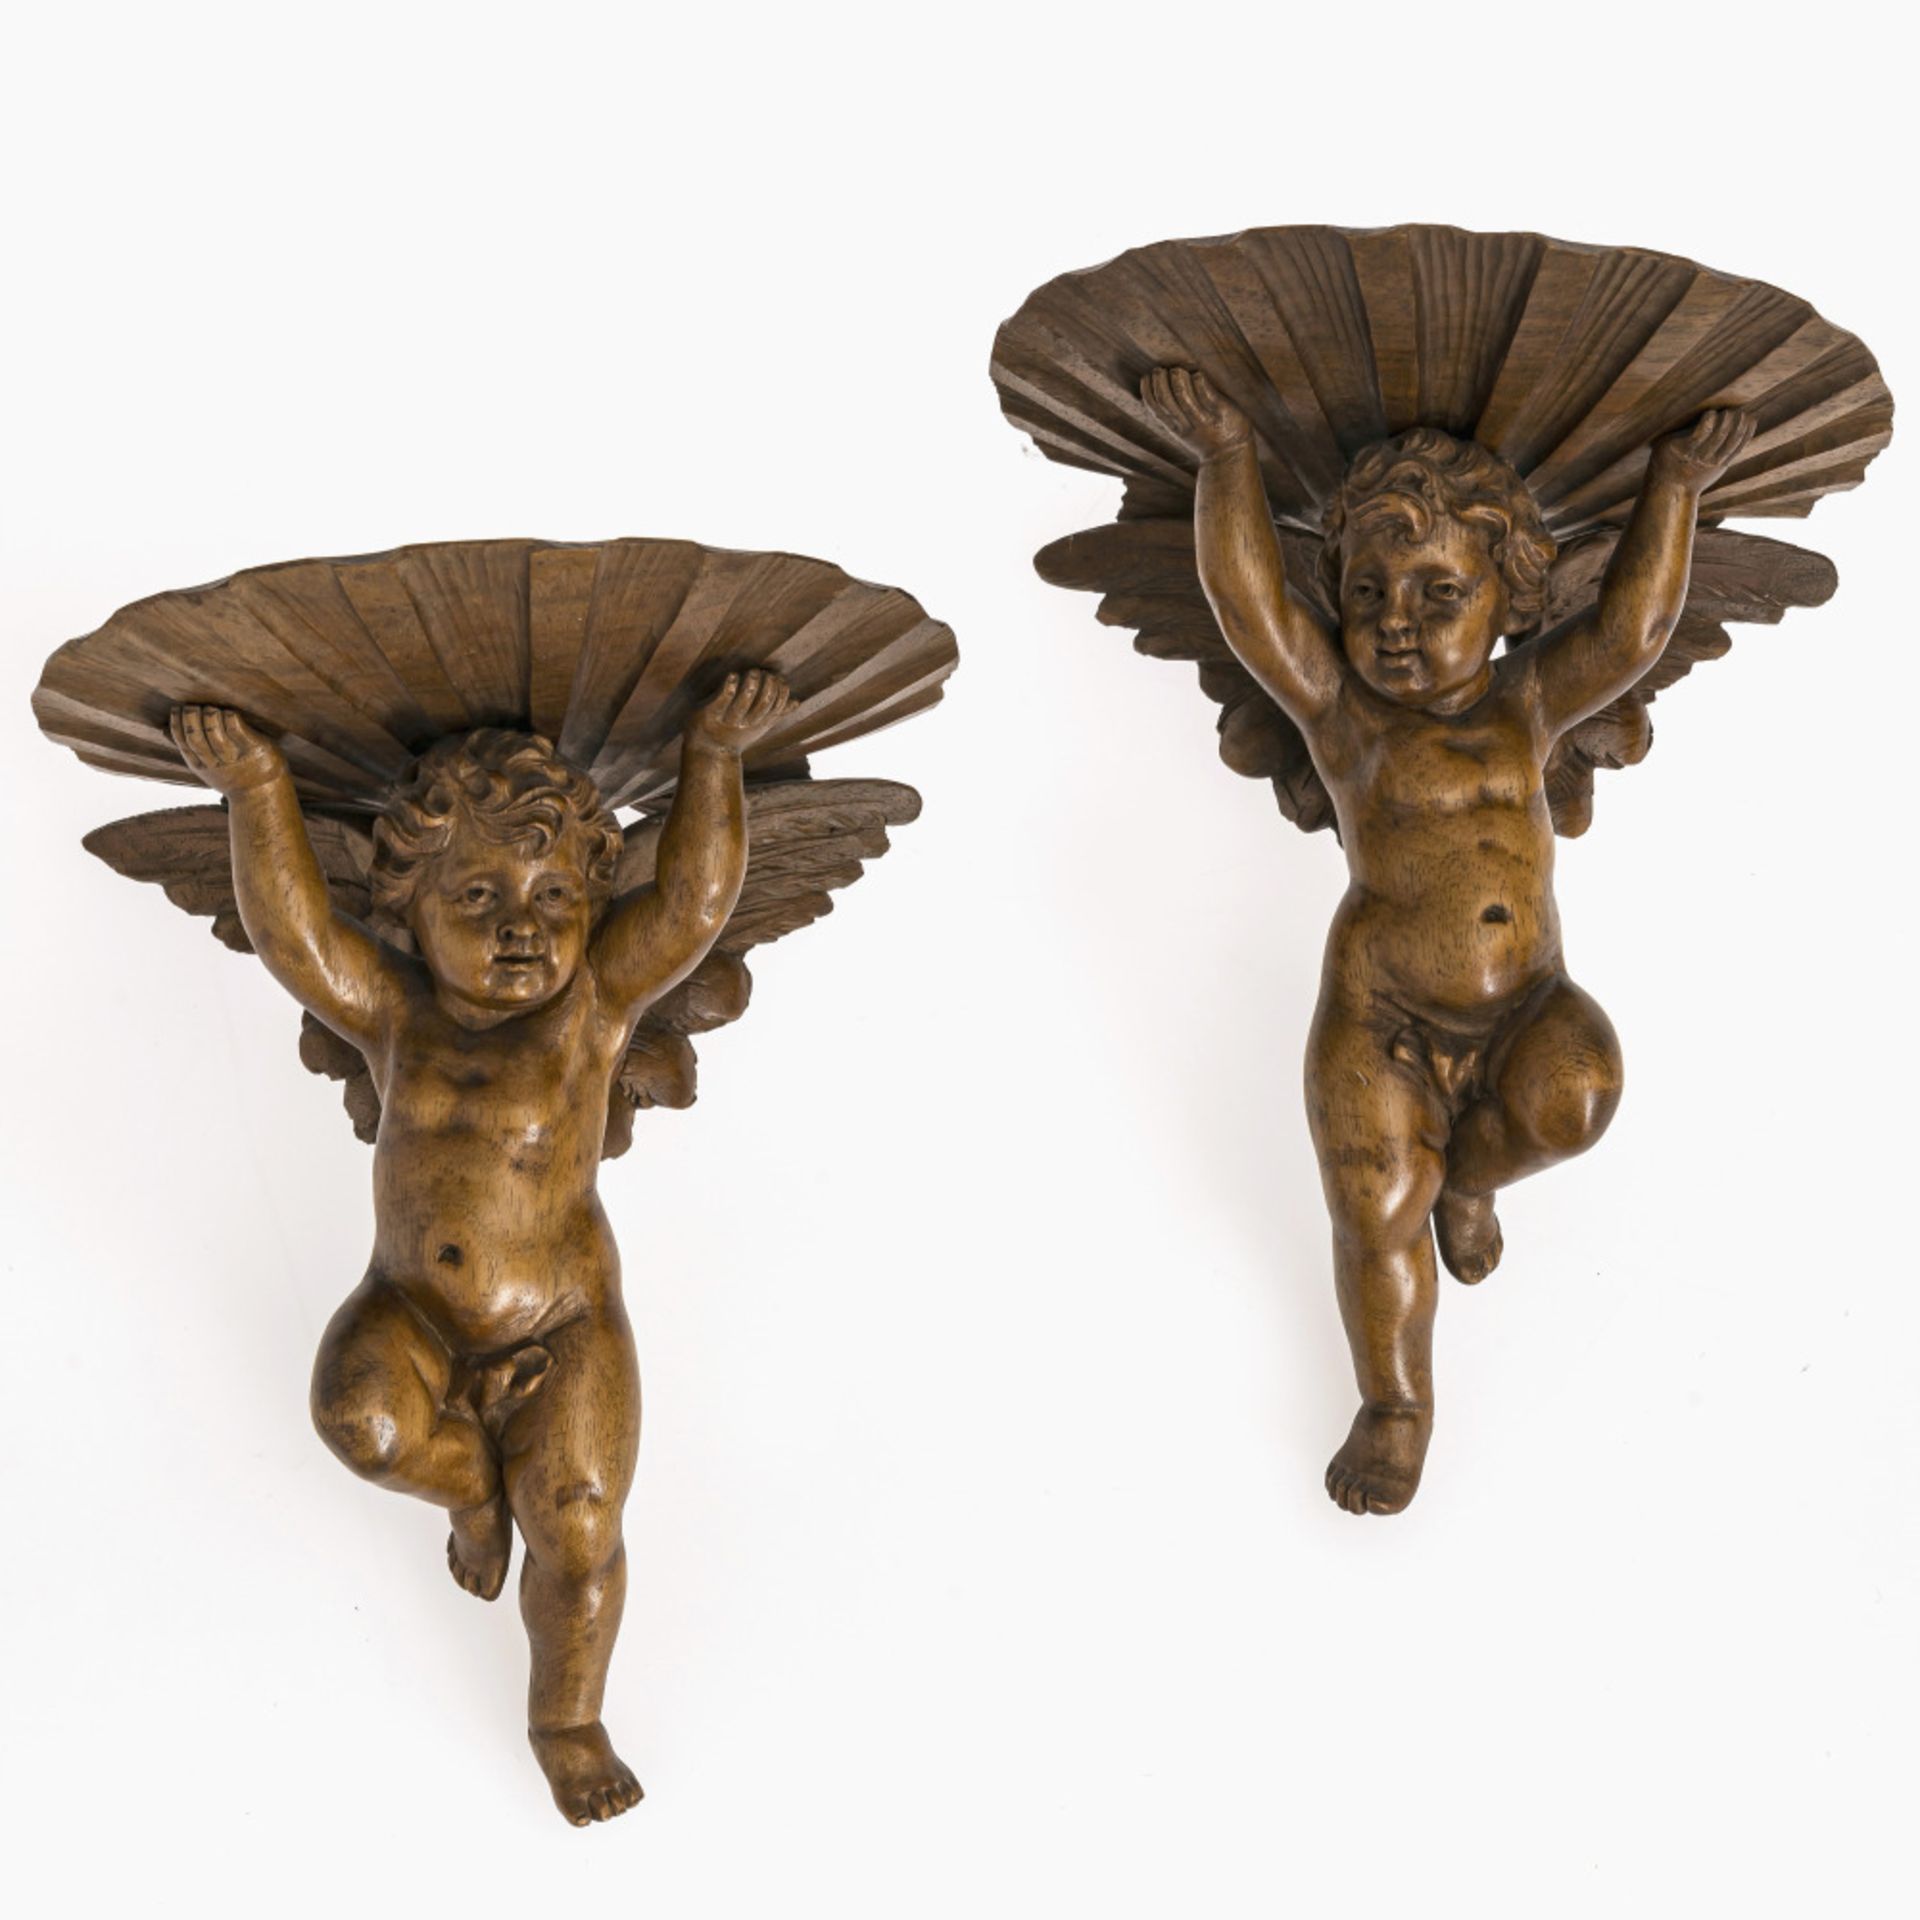 A pair of small wall consoles - Italian baroque style